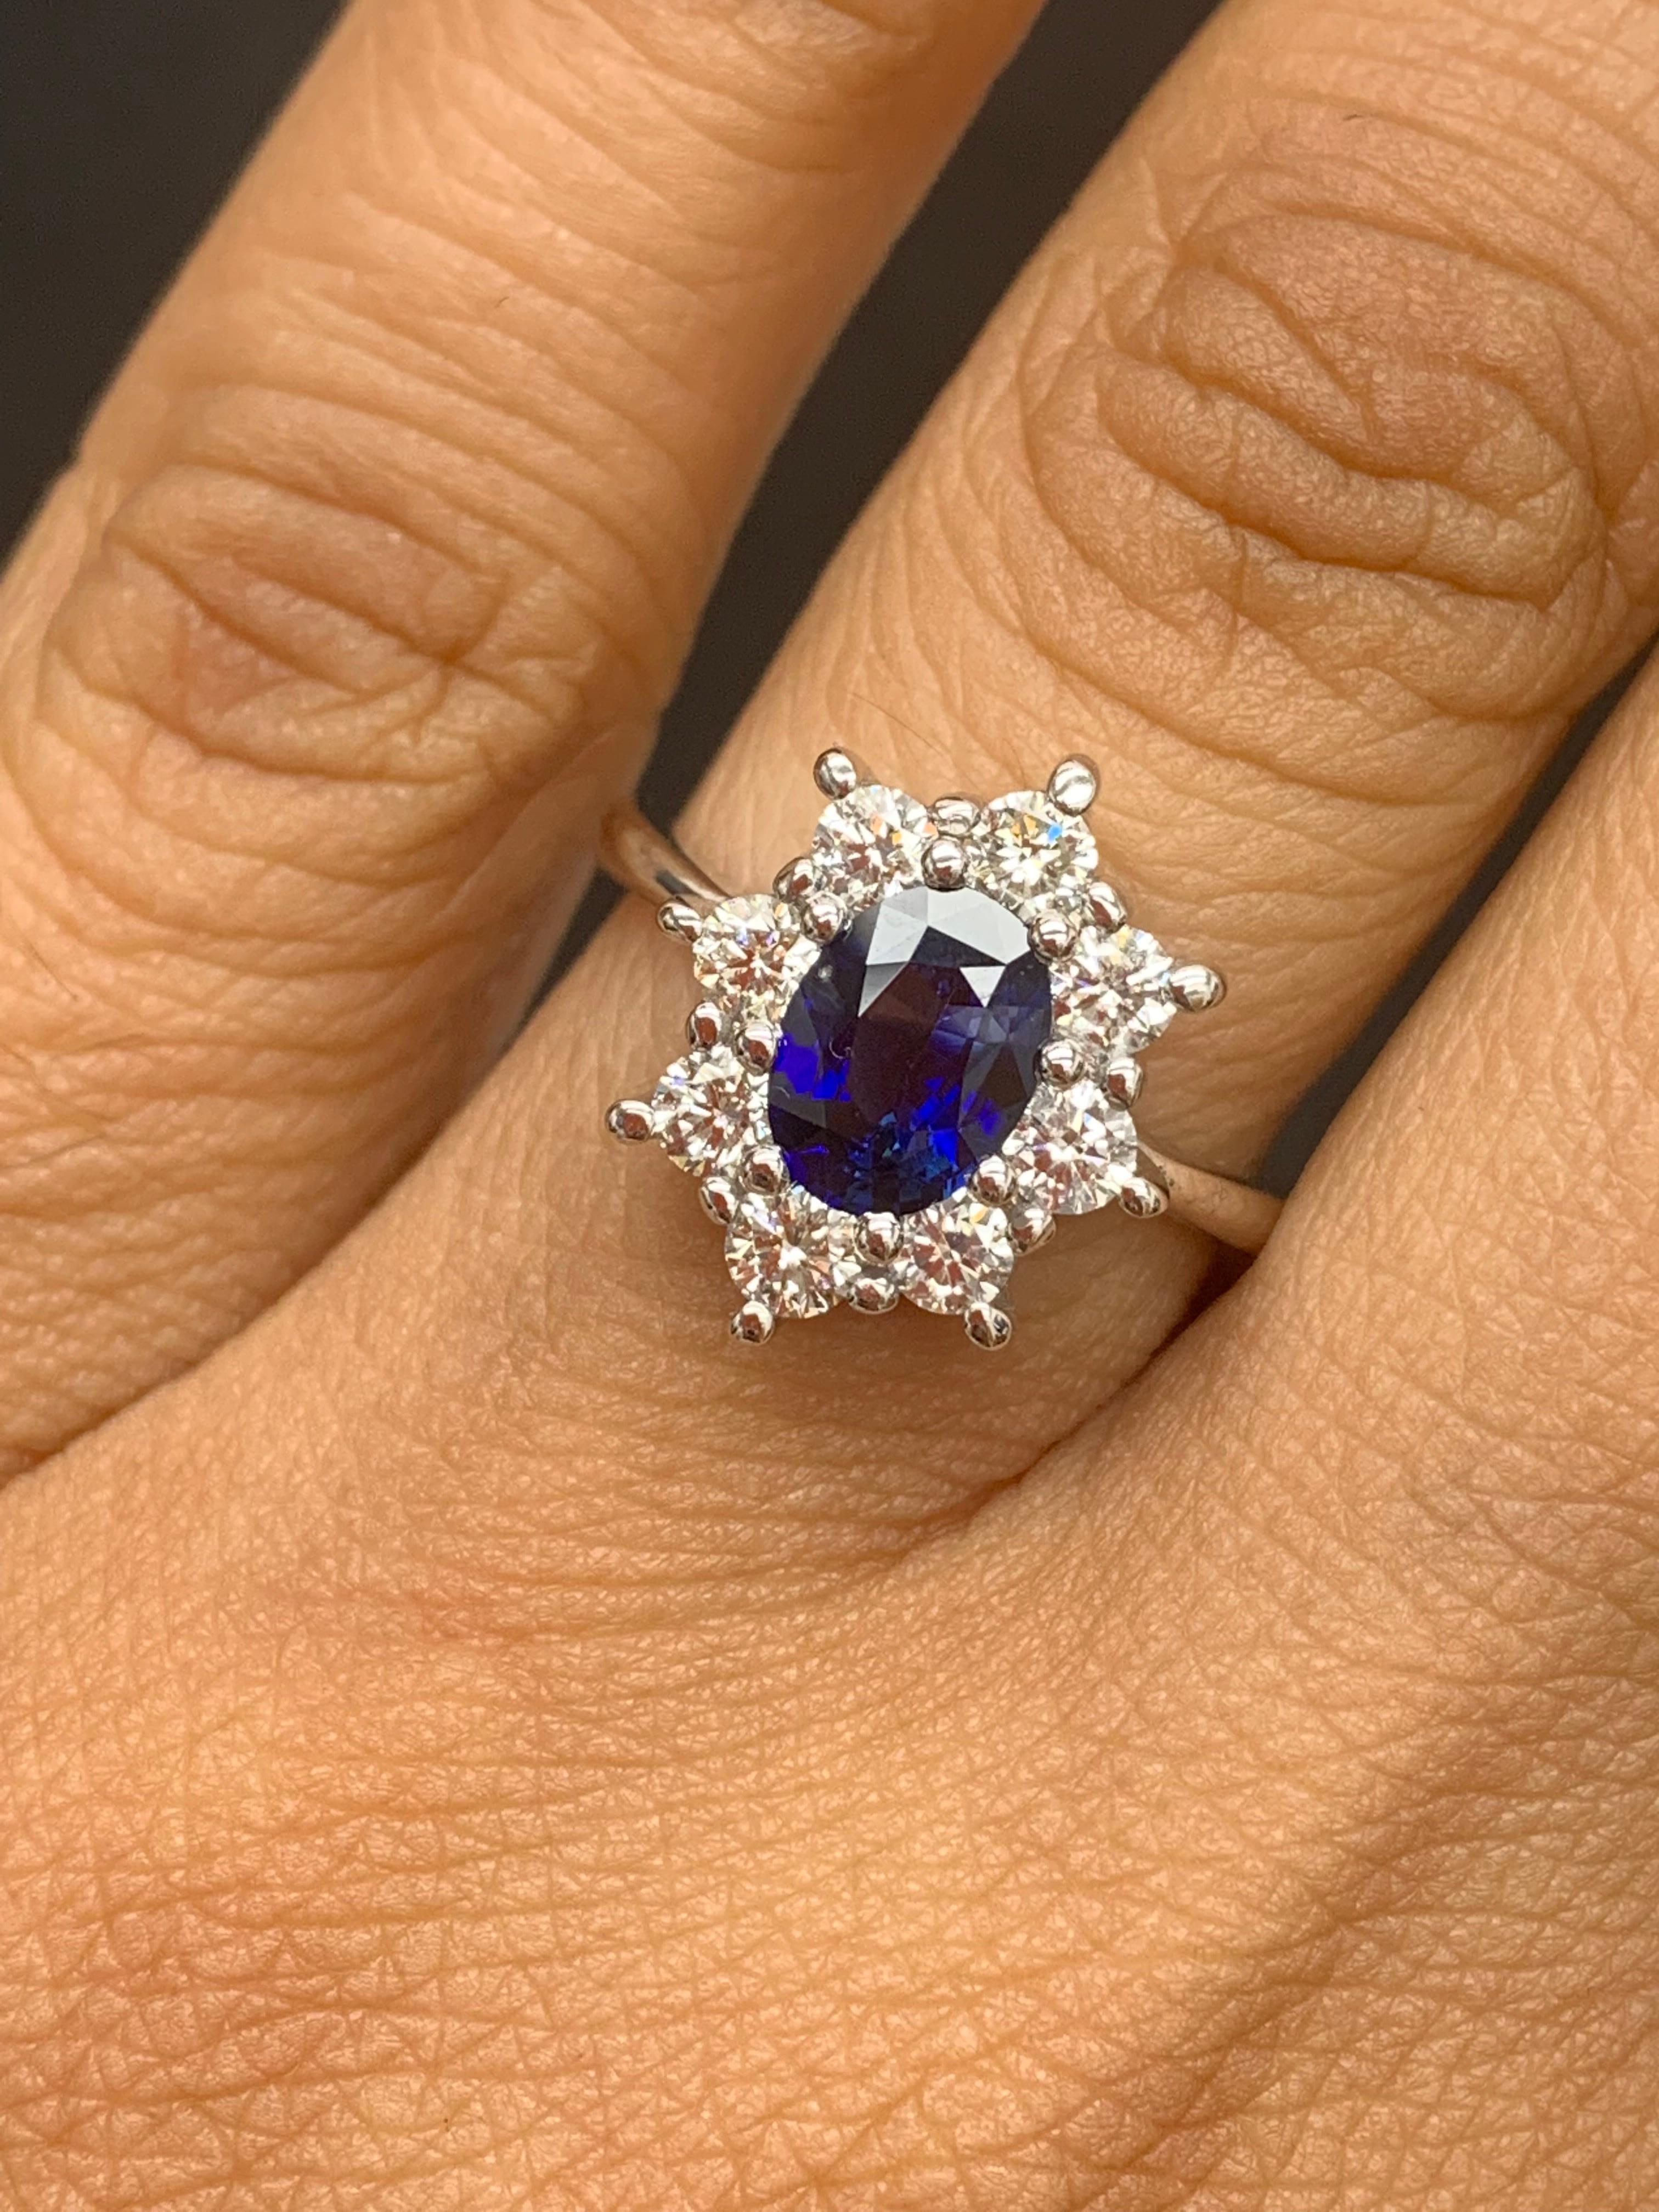 A stunning well-crafted engagement ring showcasing a 1.11-carat oval cut blue sapphire. Flanking the center diamond are perfectly matched brilliant cut 8 diamonds weighing 0.78 carat in total, set in a polished 14K White Gold mounting. Handcrafted